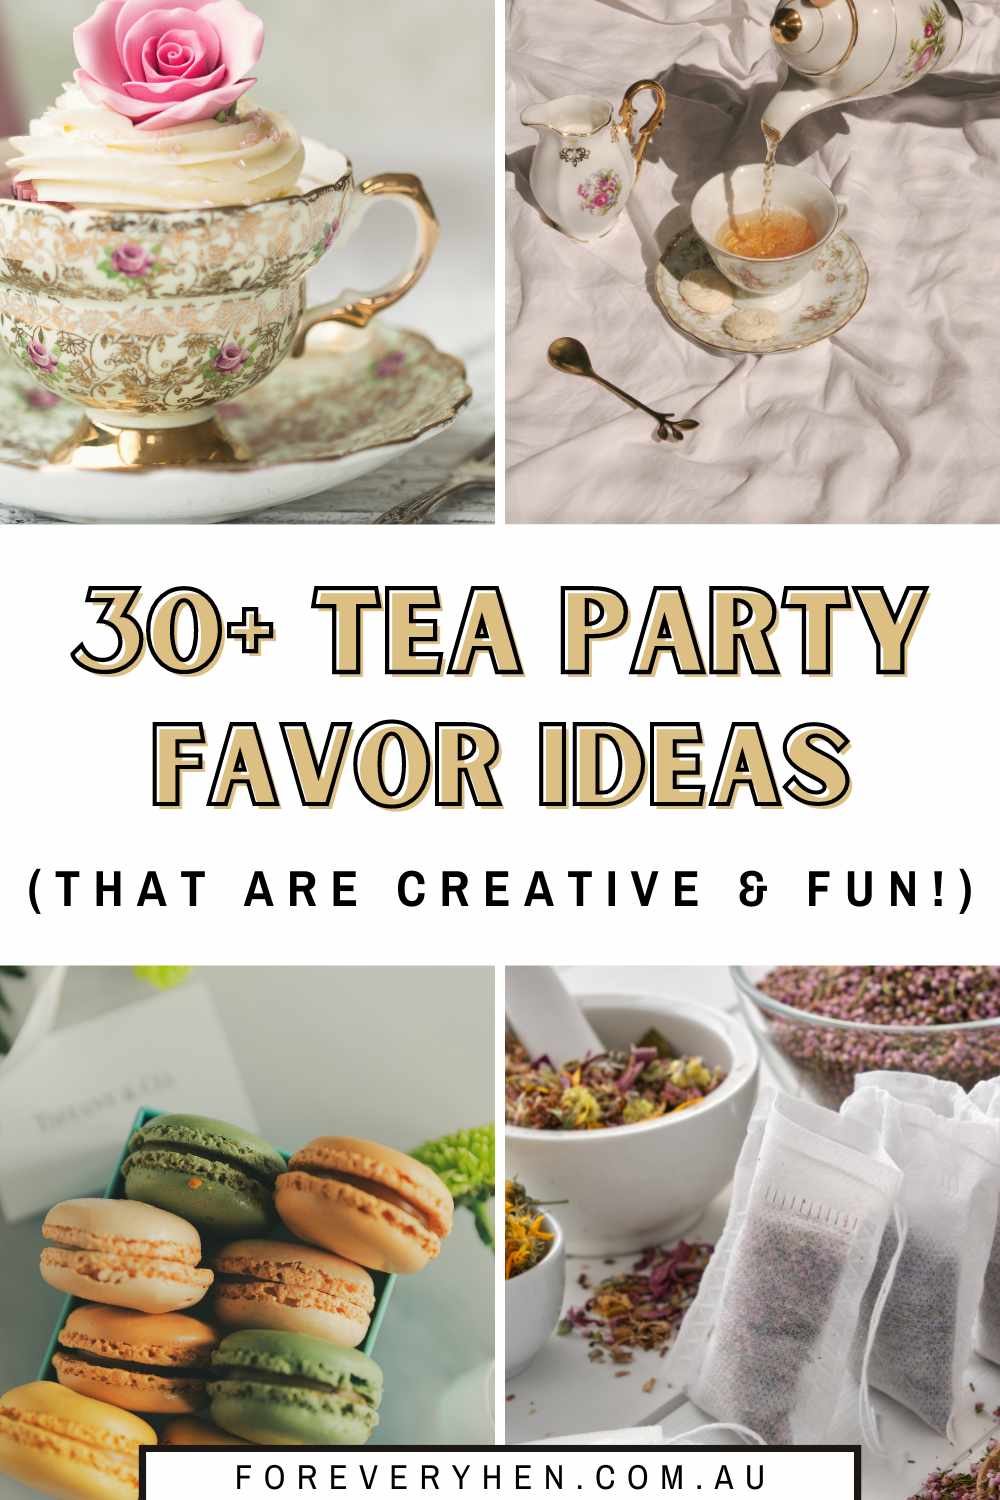 Collage of teacups, tea pots, tea bags and macarons. Text overlay: 30+ tea party favor ideas (that are creative and fun!)